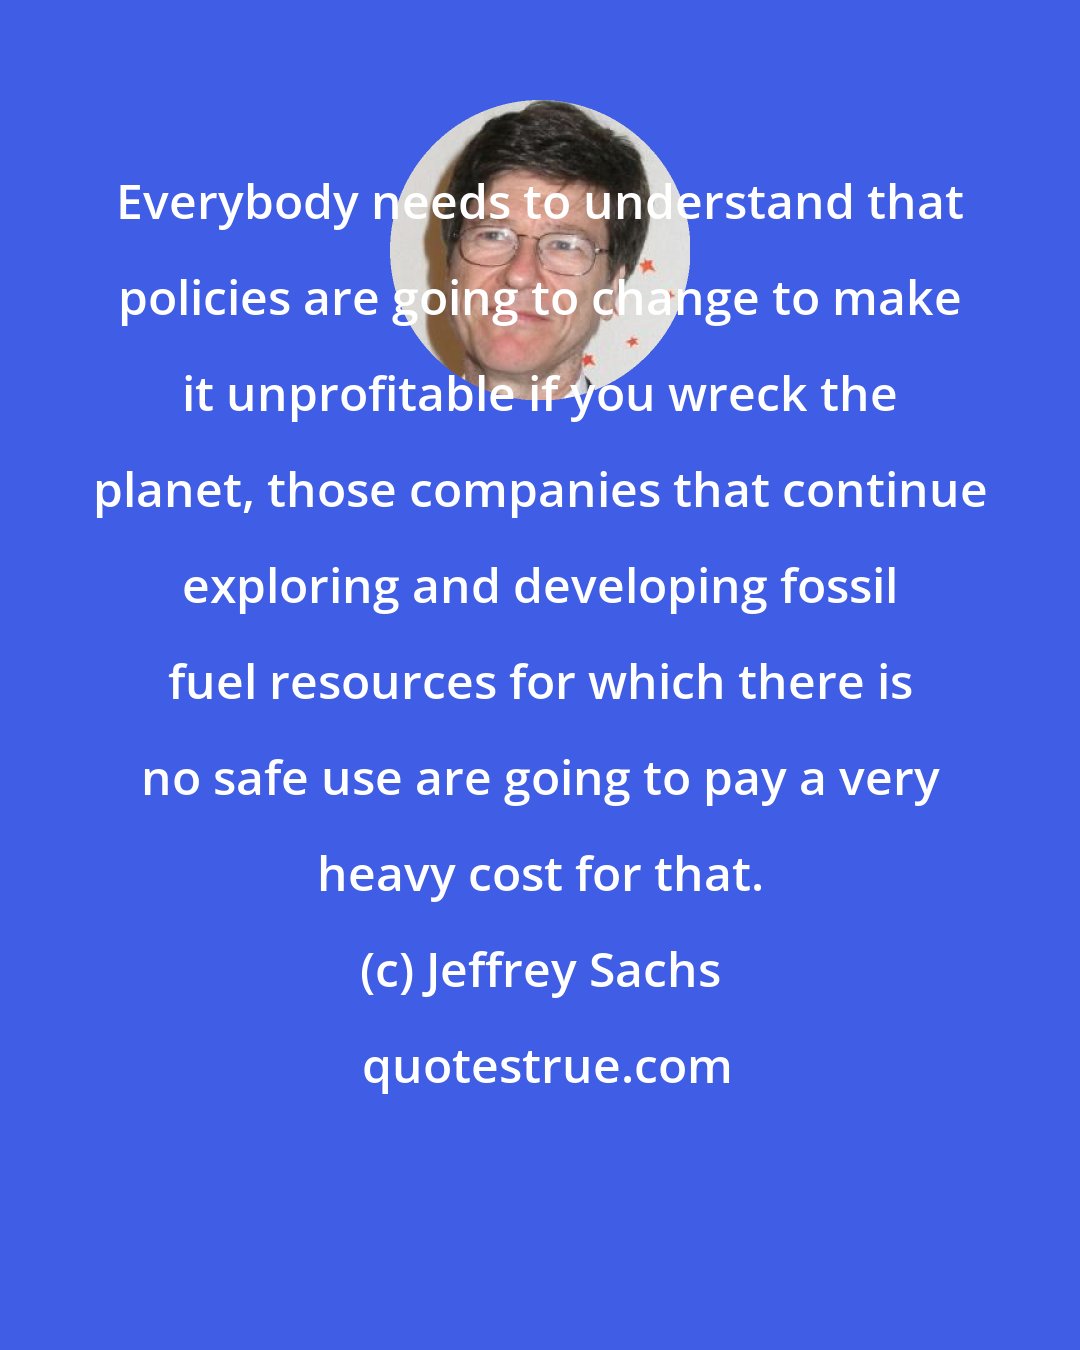 Jeffrey Sachs: Everybody needs to understand that policies are going to change to make it unprofitable if you wreck the planet, those companies that continue exploring and developing fossil fuel resources for which there is no safe use are going to pay a very heavy cost for that.